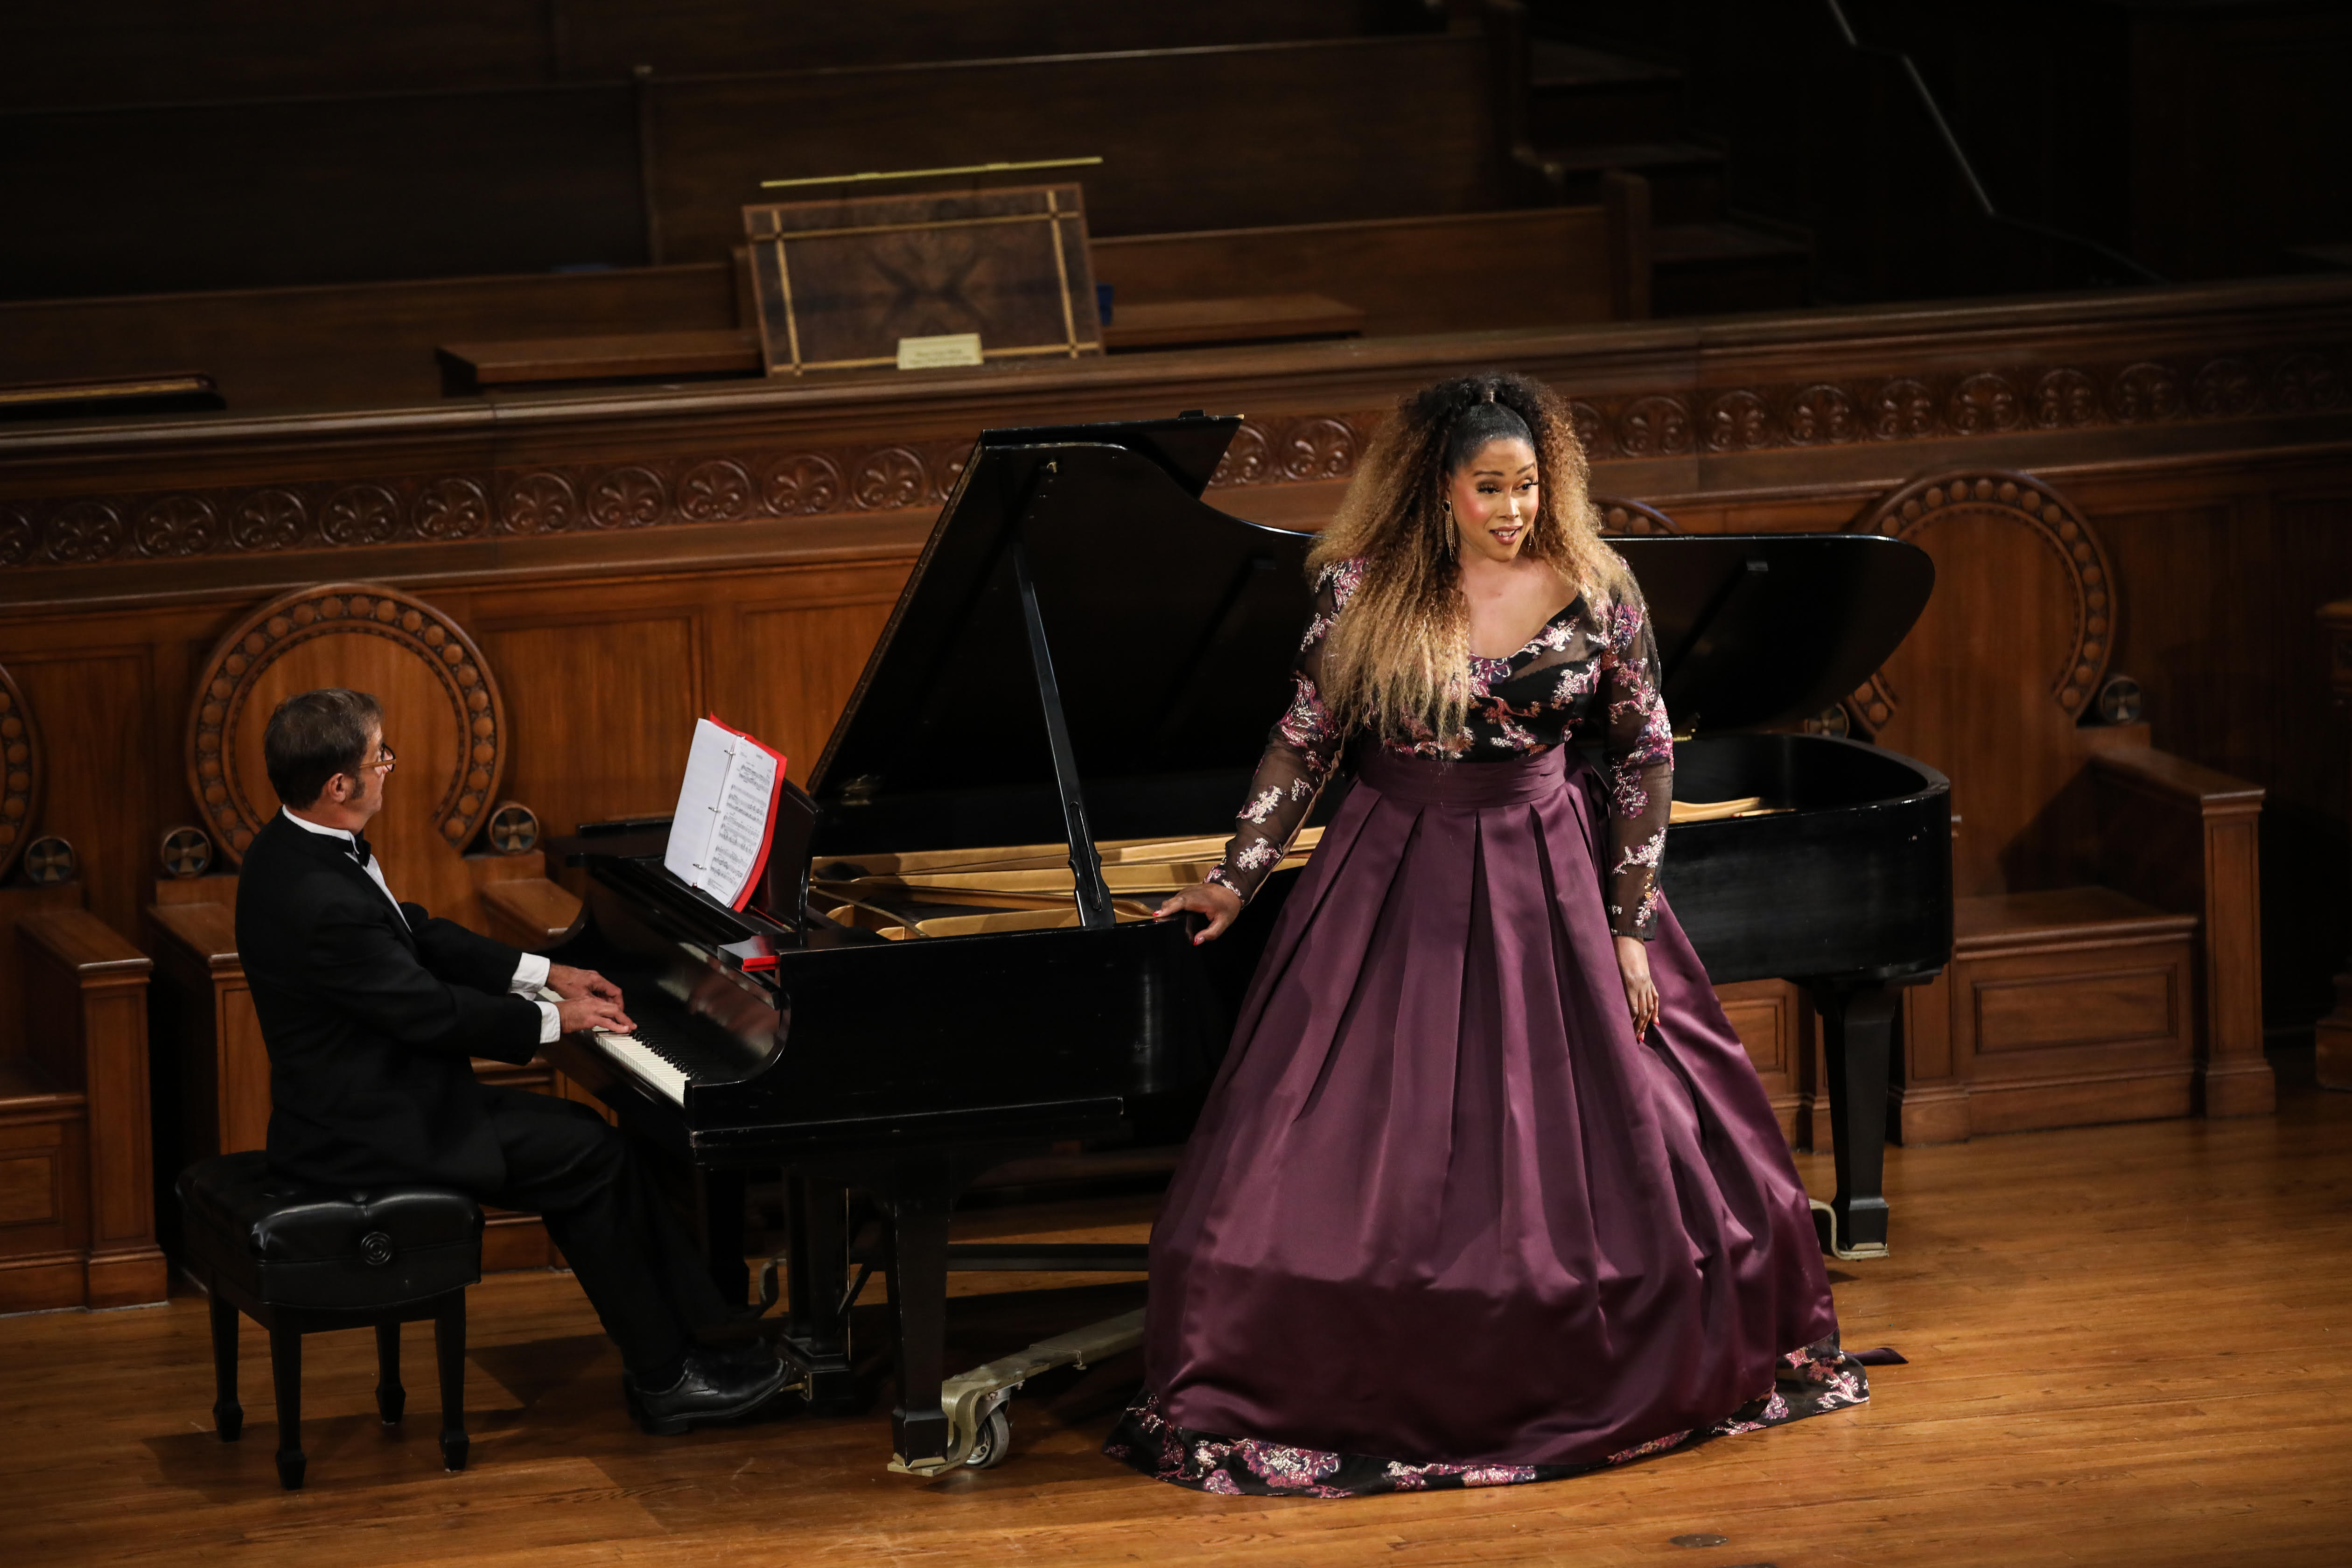 Black woman opera singer with long blond and black hair in a floor length long-sleeved hooped burgundy dress standing in front of a grand piano on stage